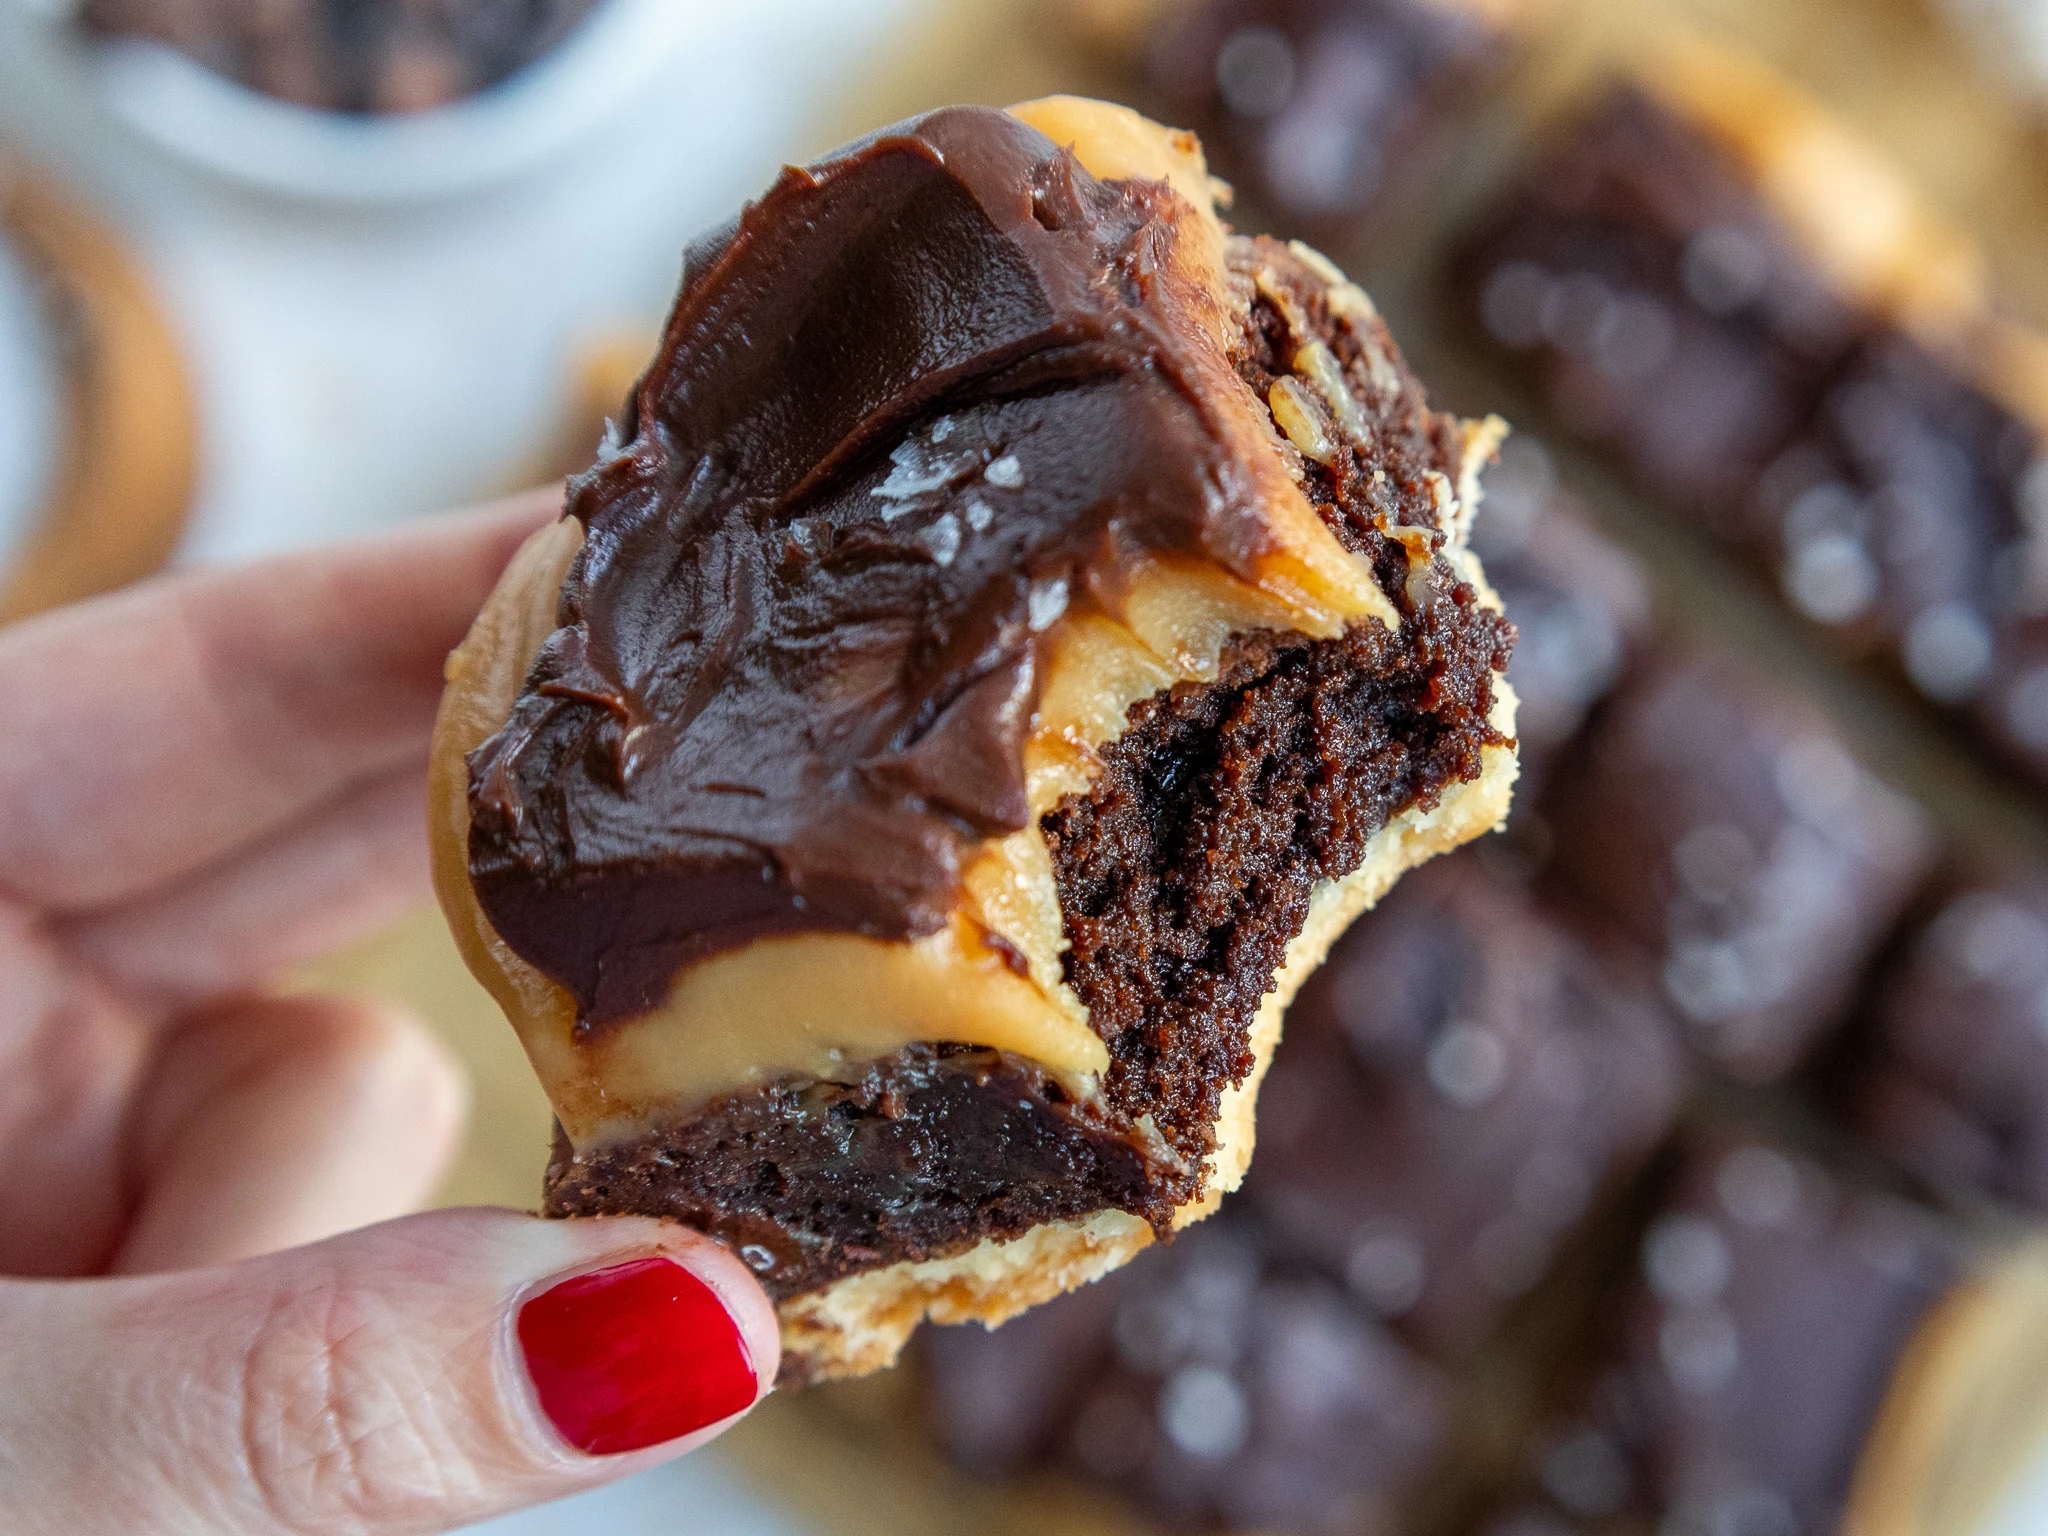 image of a millionaire brownie being held up to show it's caramel and ganache topping